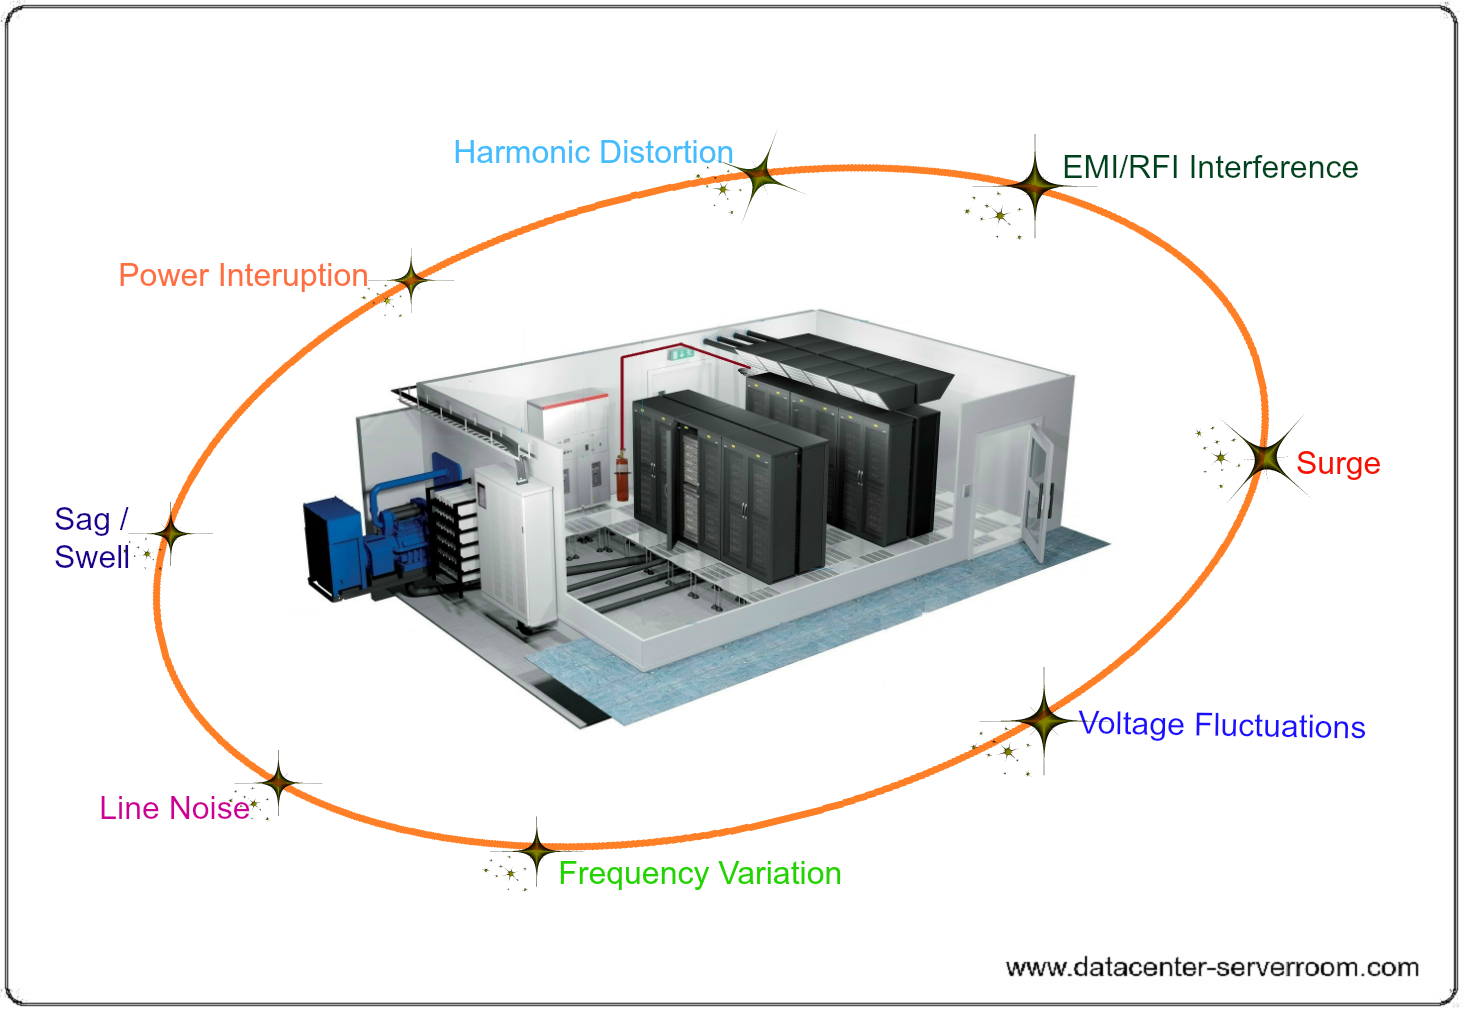 Data center subject to various trasients from utililty power.